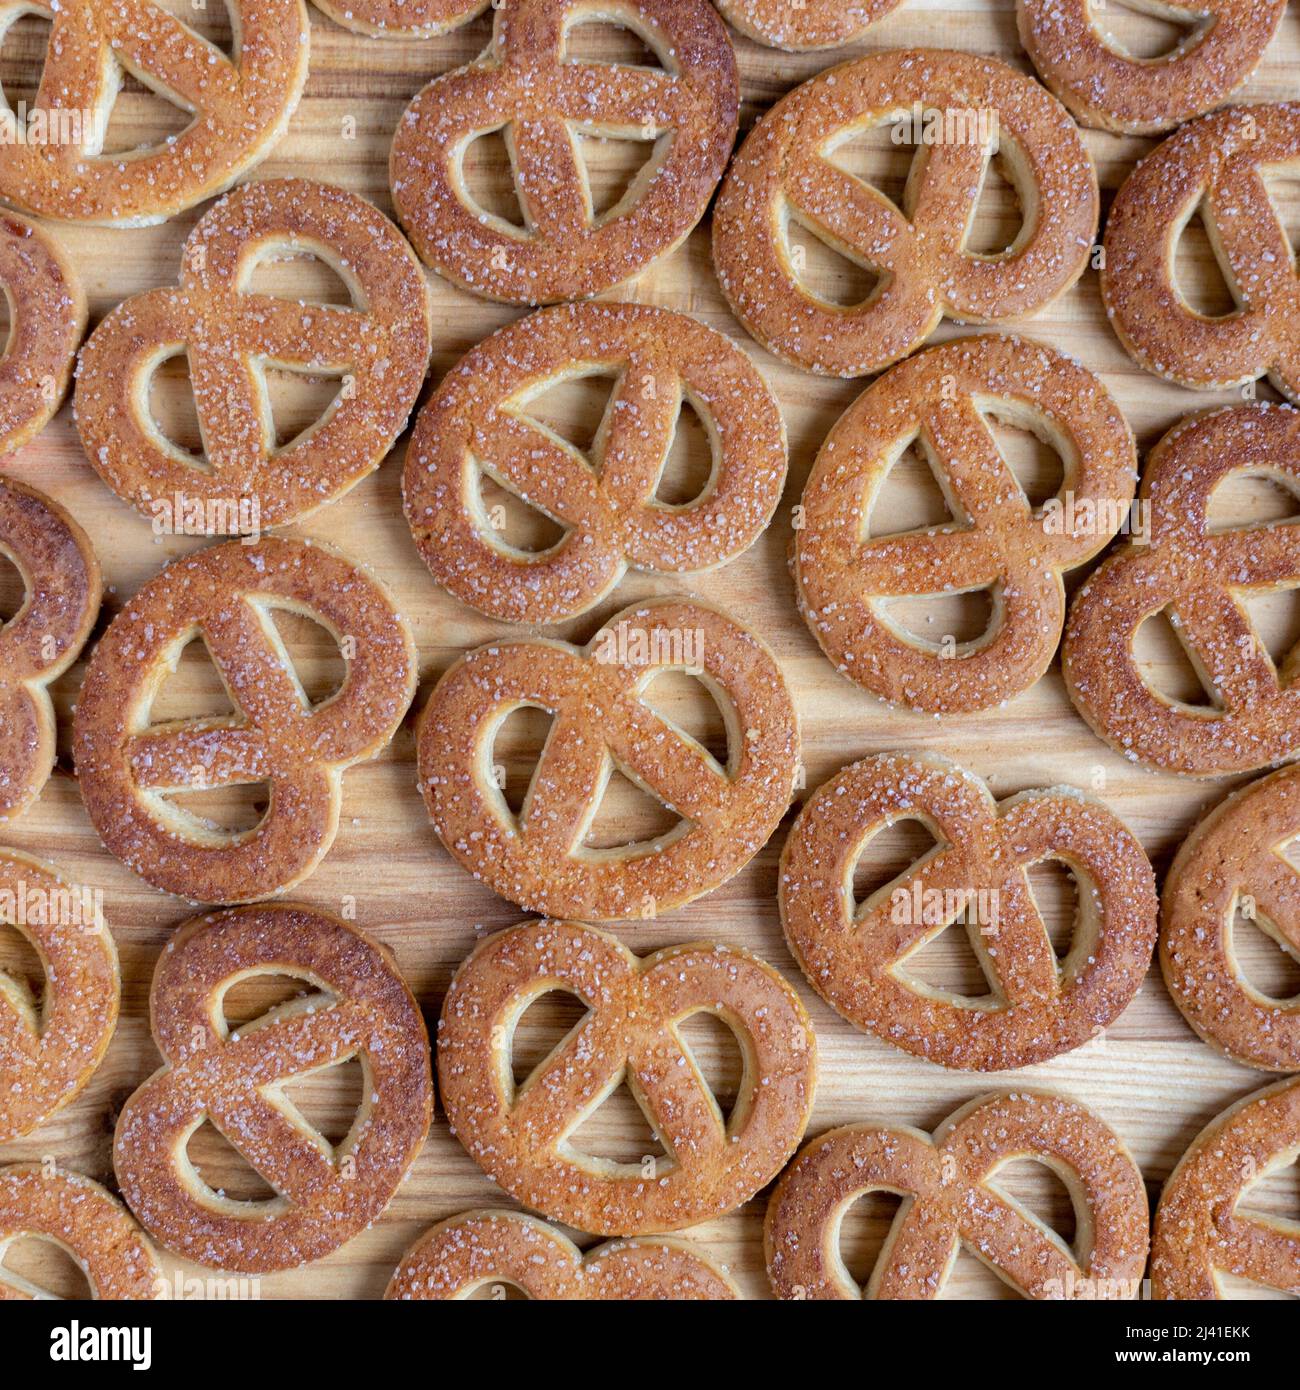 Pretzels sprinkled with sugar lie on a wooden surface Stock Photo